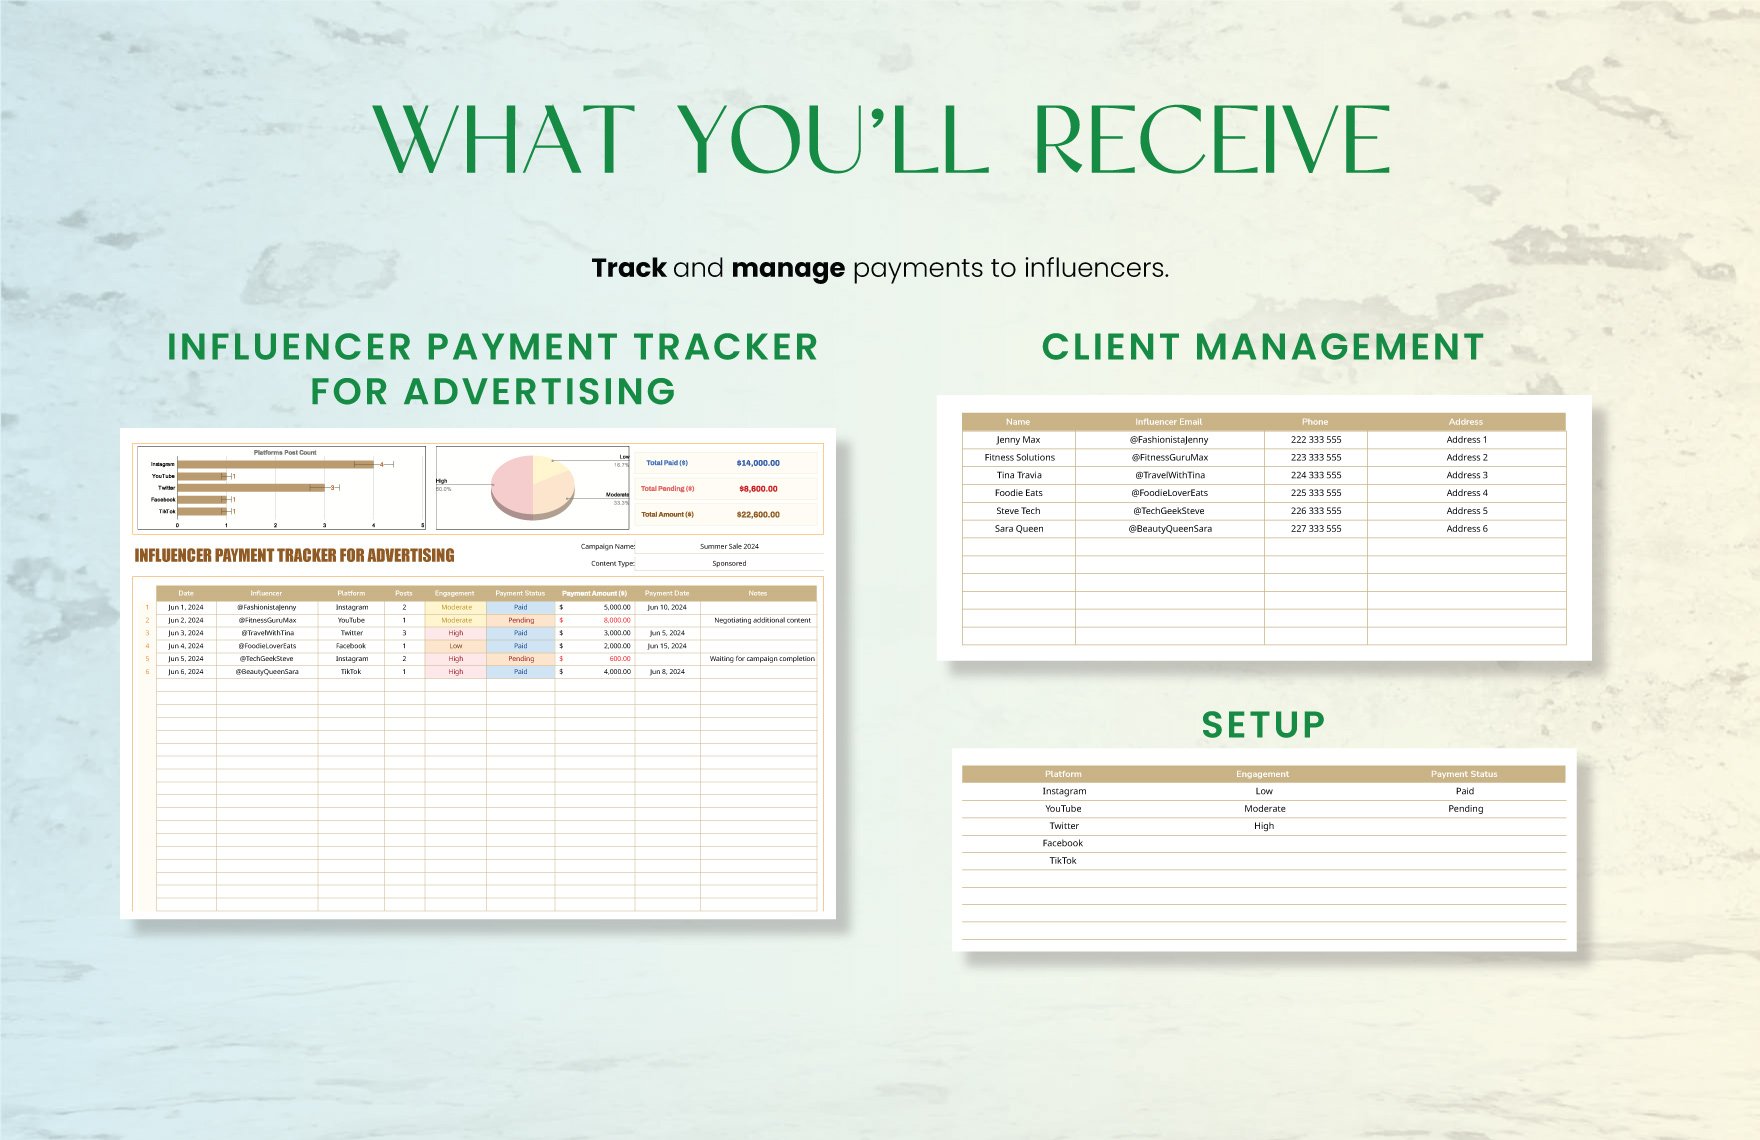 Influencer Payment Tracker for Advertising Template